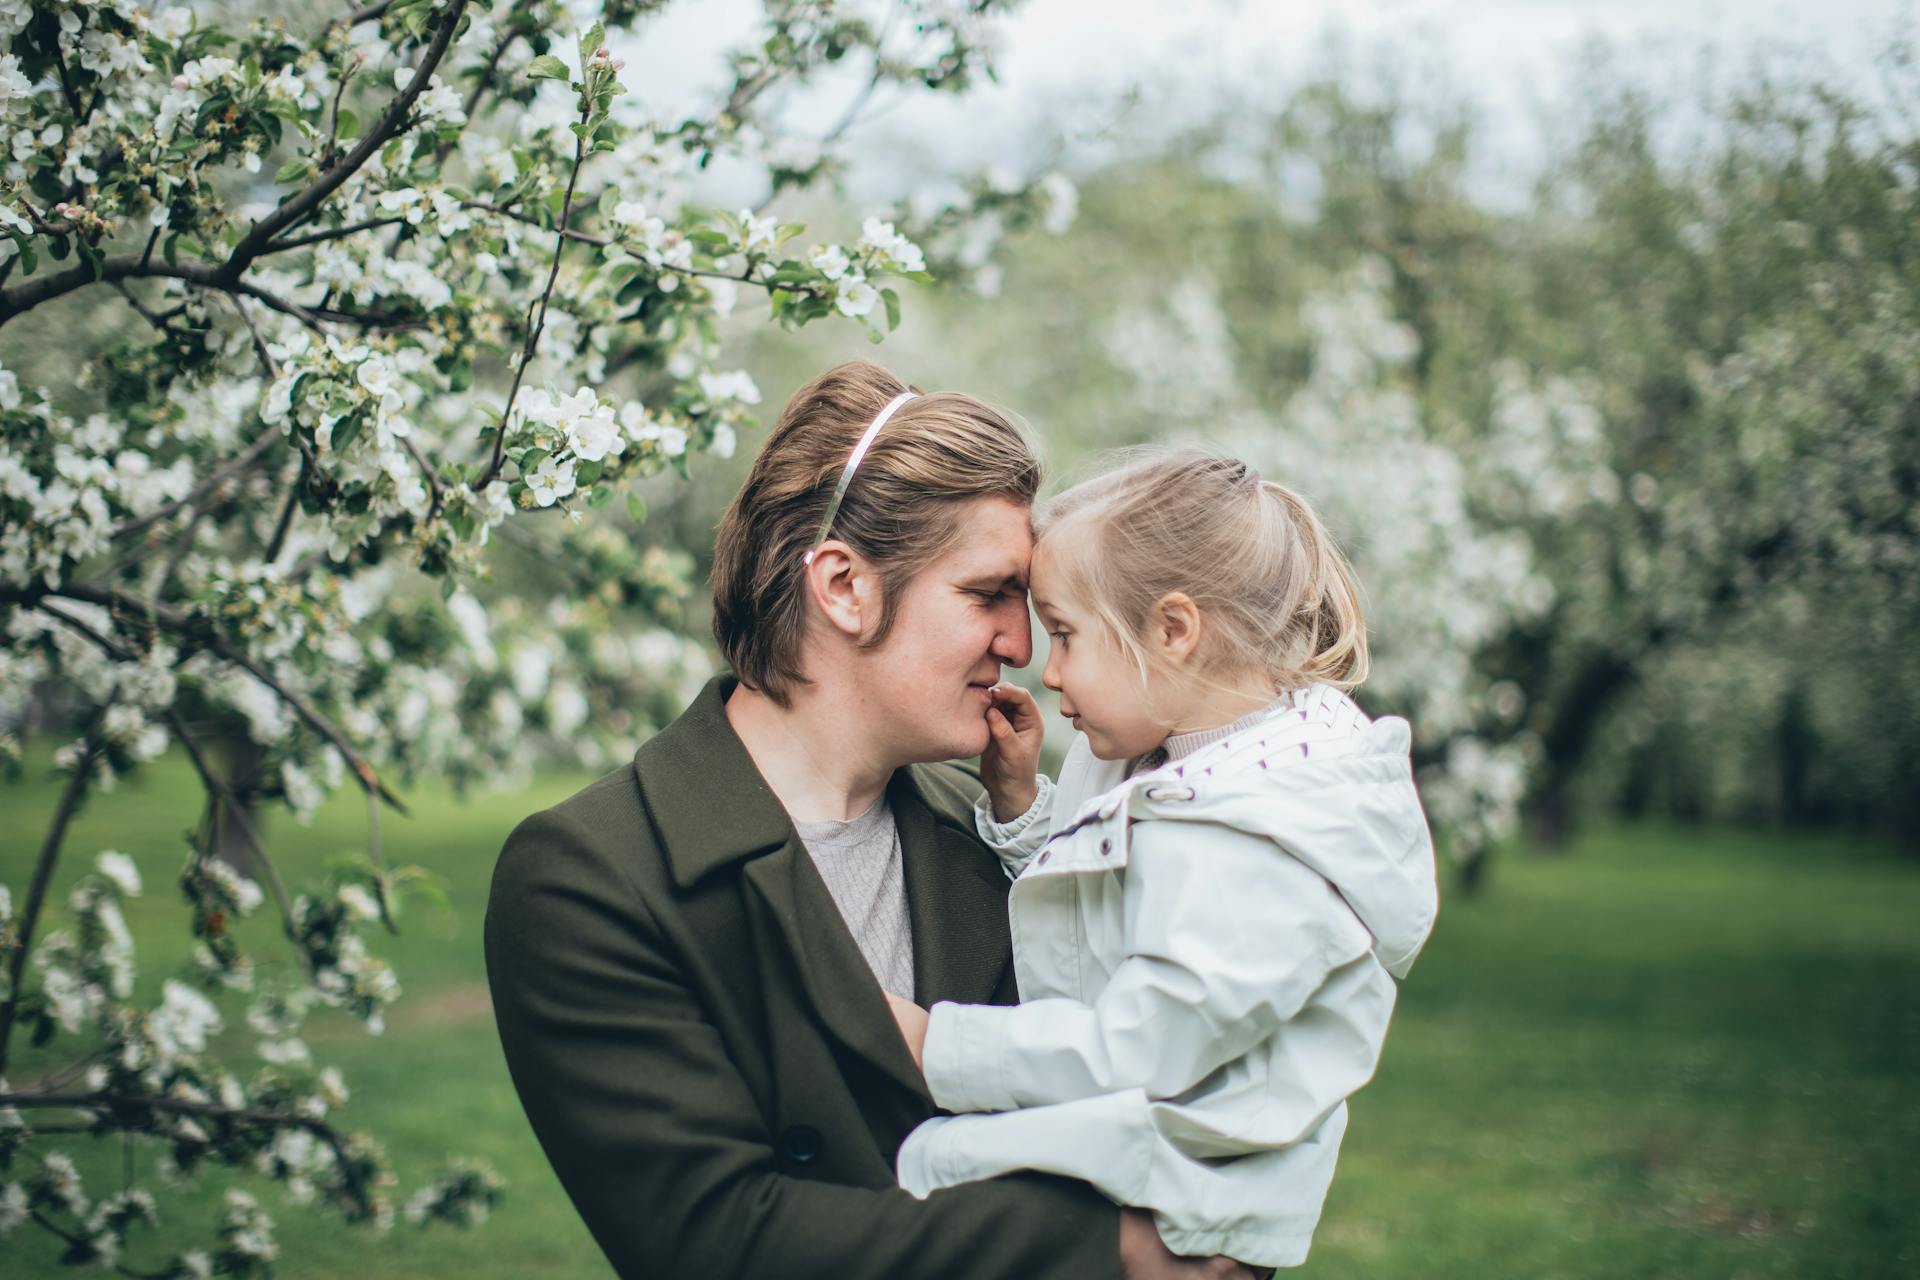 A father and daughter hugging near a tree | Source: Pexels